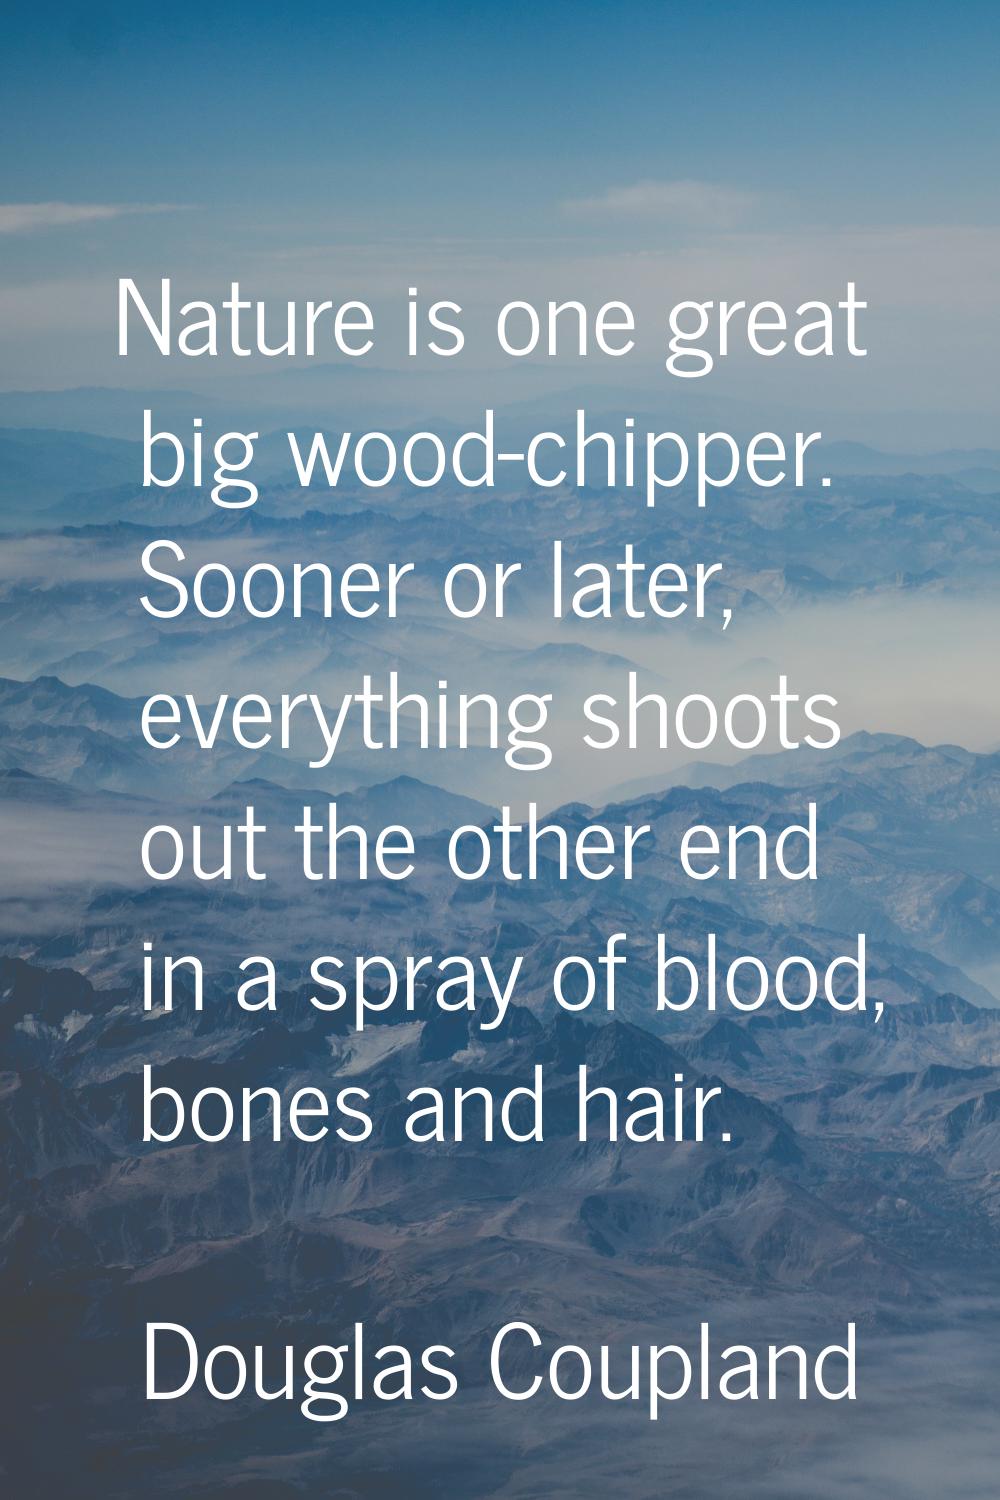 Nature is one great big wood-chipper. Sooner or later, everything shoots out the other end in a spr